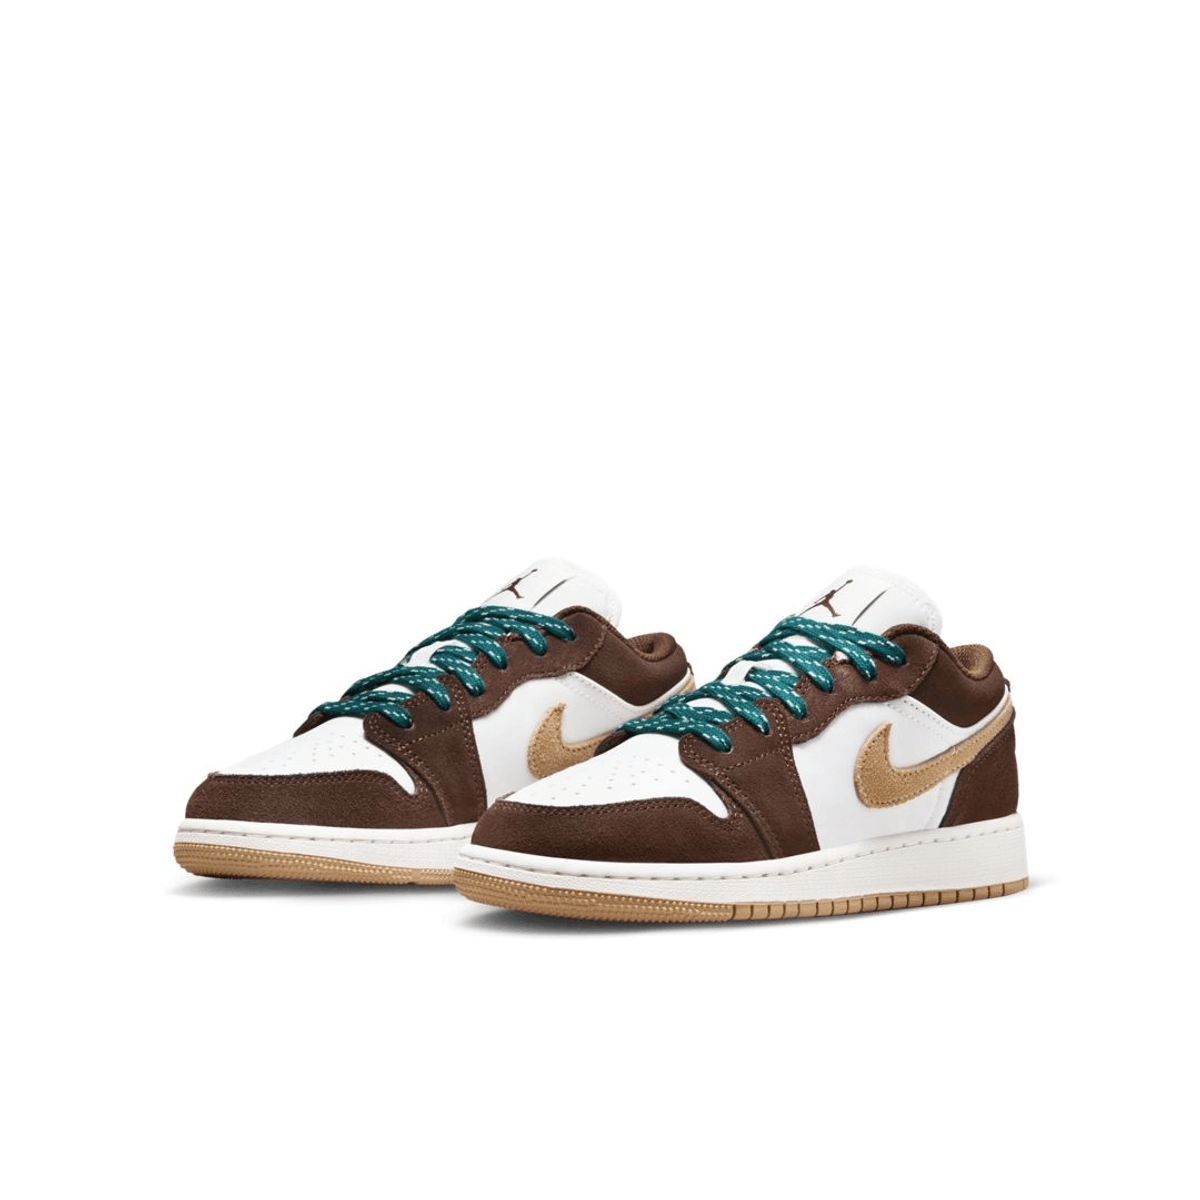 The Kids Will Be Ready To Go Back To School With The Air Jordan 1 Cacao Wow GS